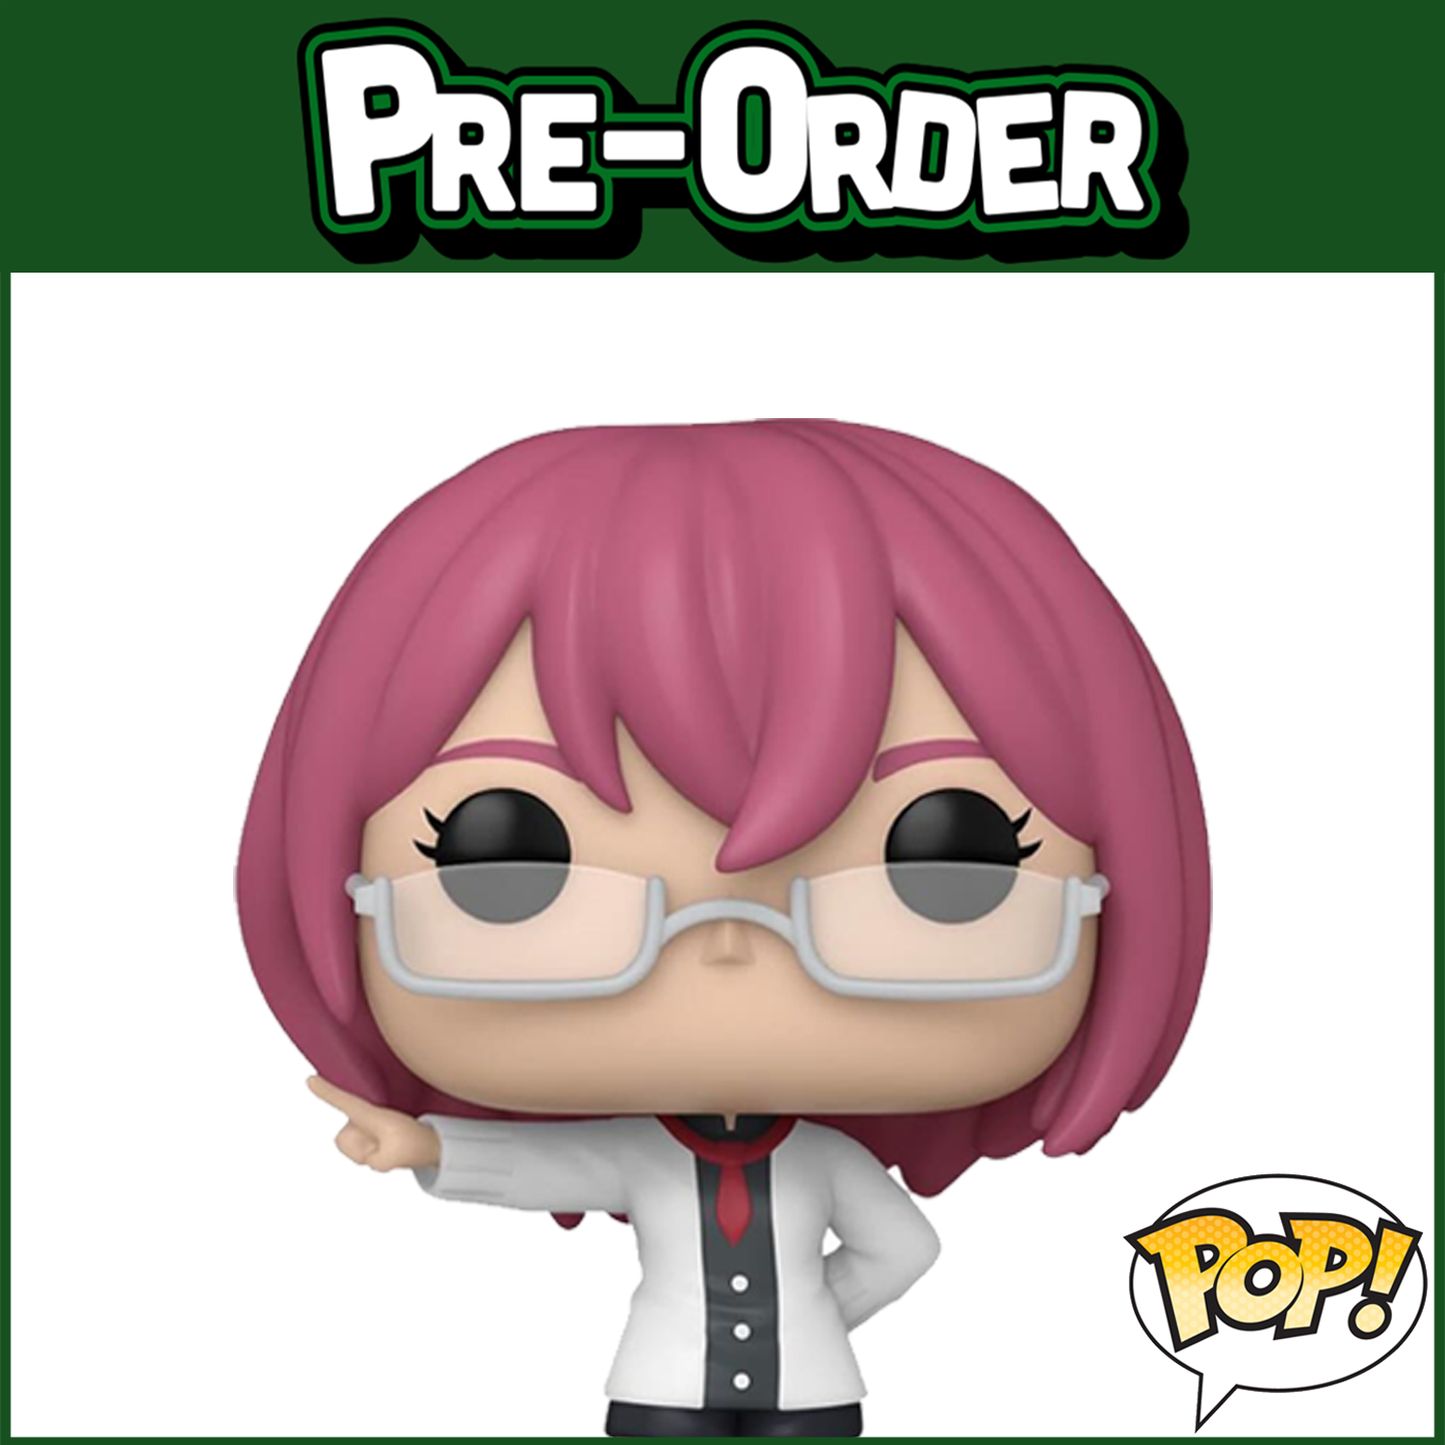 (PRE-ORDER) Funko POP! Animation: Seven Deadly Sins - Gowther #1498